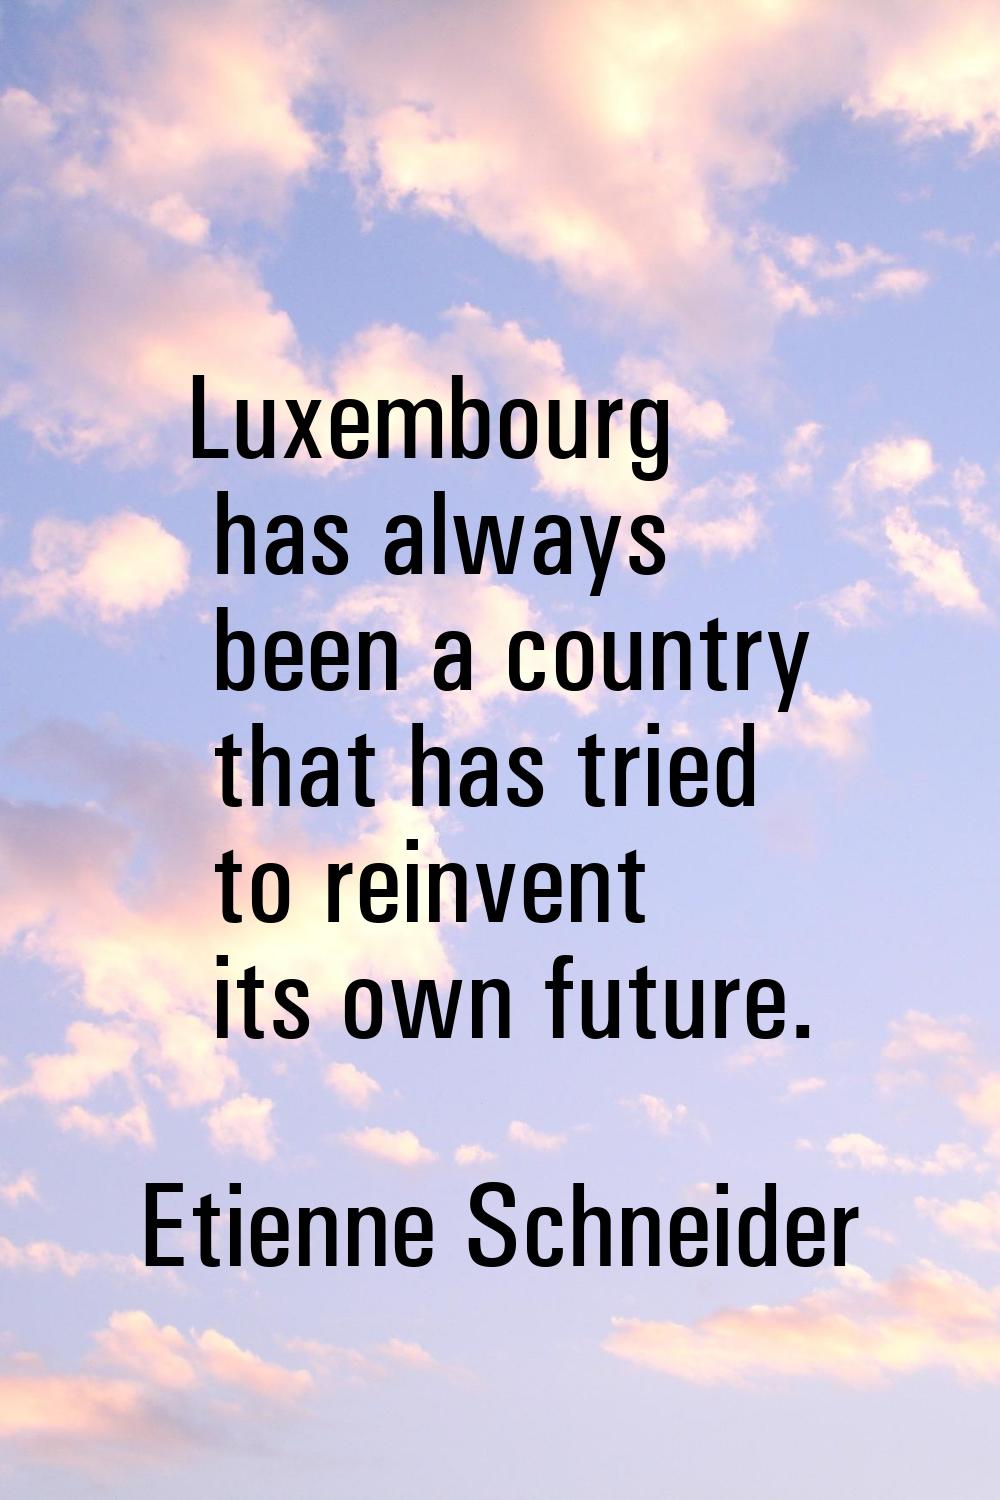 Luxembourg has always been a country that has tried to reinvent its own future.